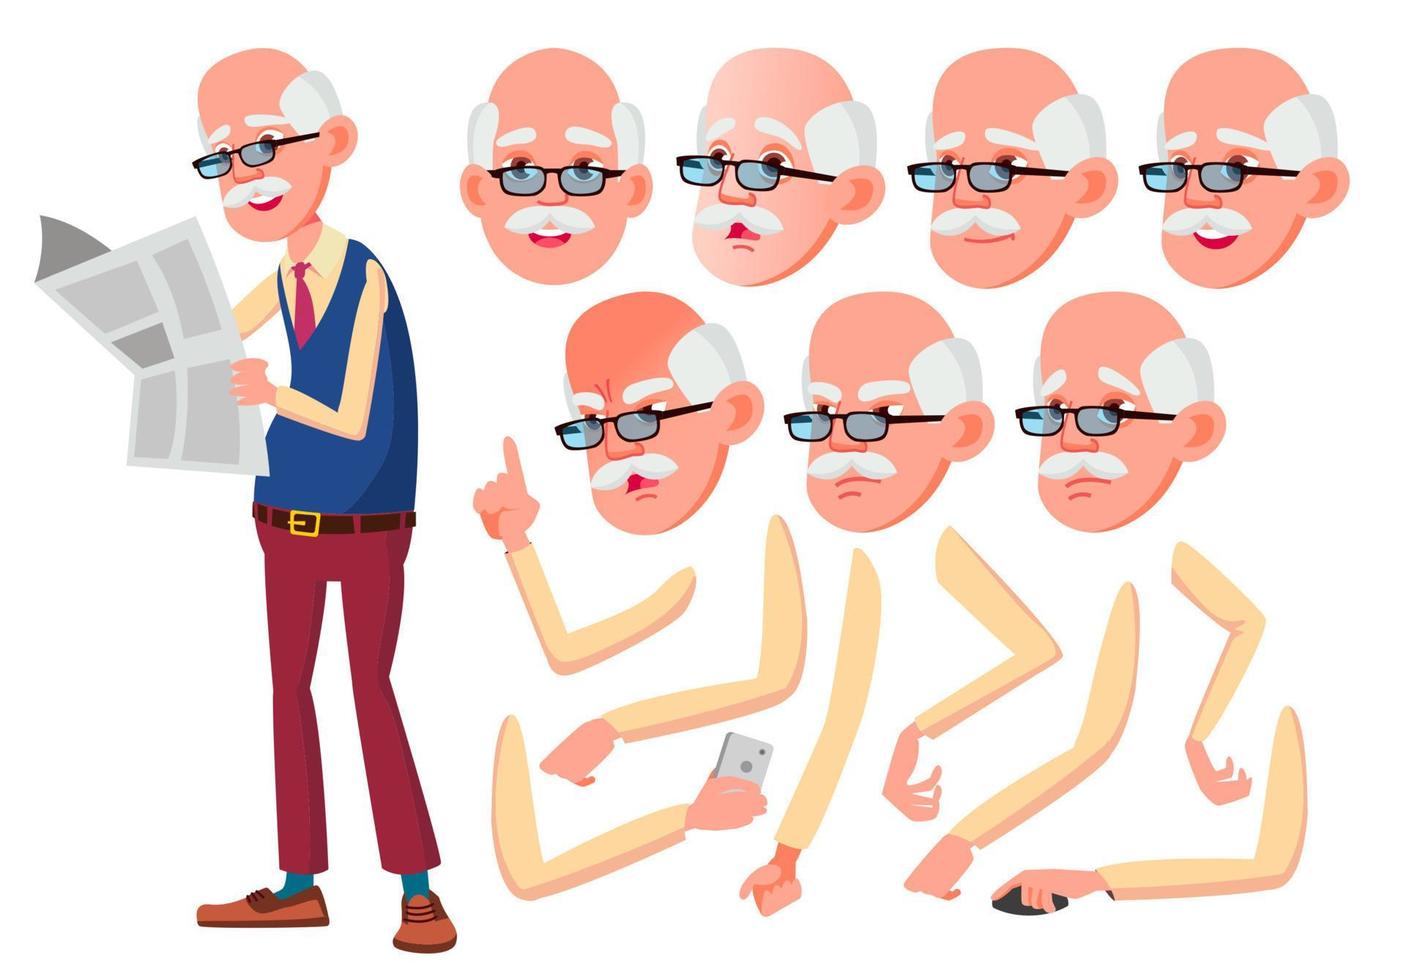 Old Man Vector. Senior Person. Aged, Elderly People. Caucasian, Positive. Face Emotions, Various Gestures. Animation Creation Set. Isolated Flat Cartoon Character Illustration vector